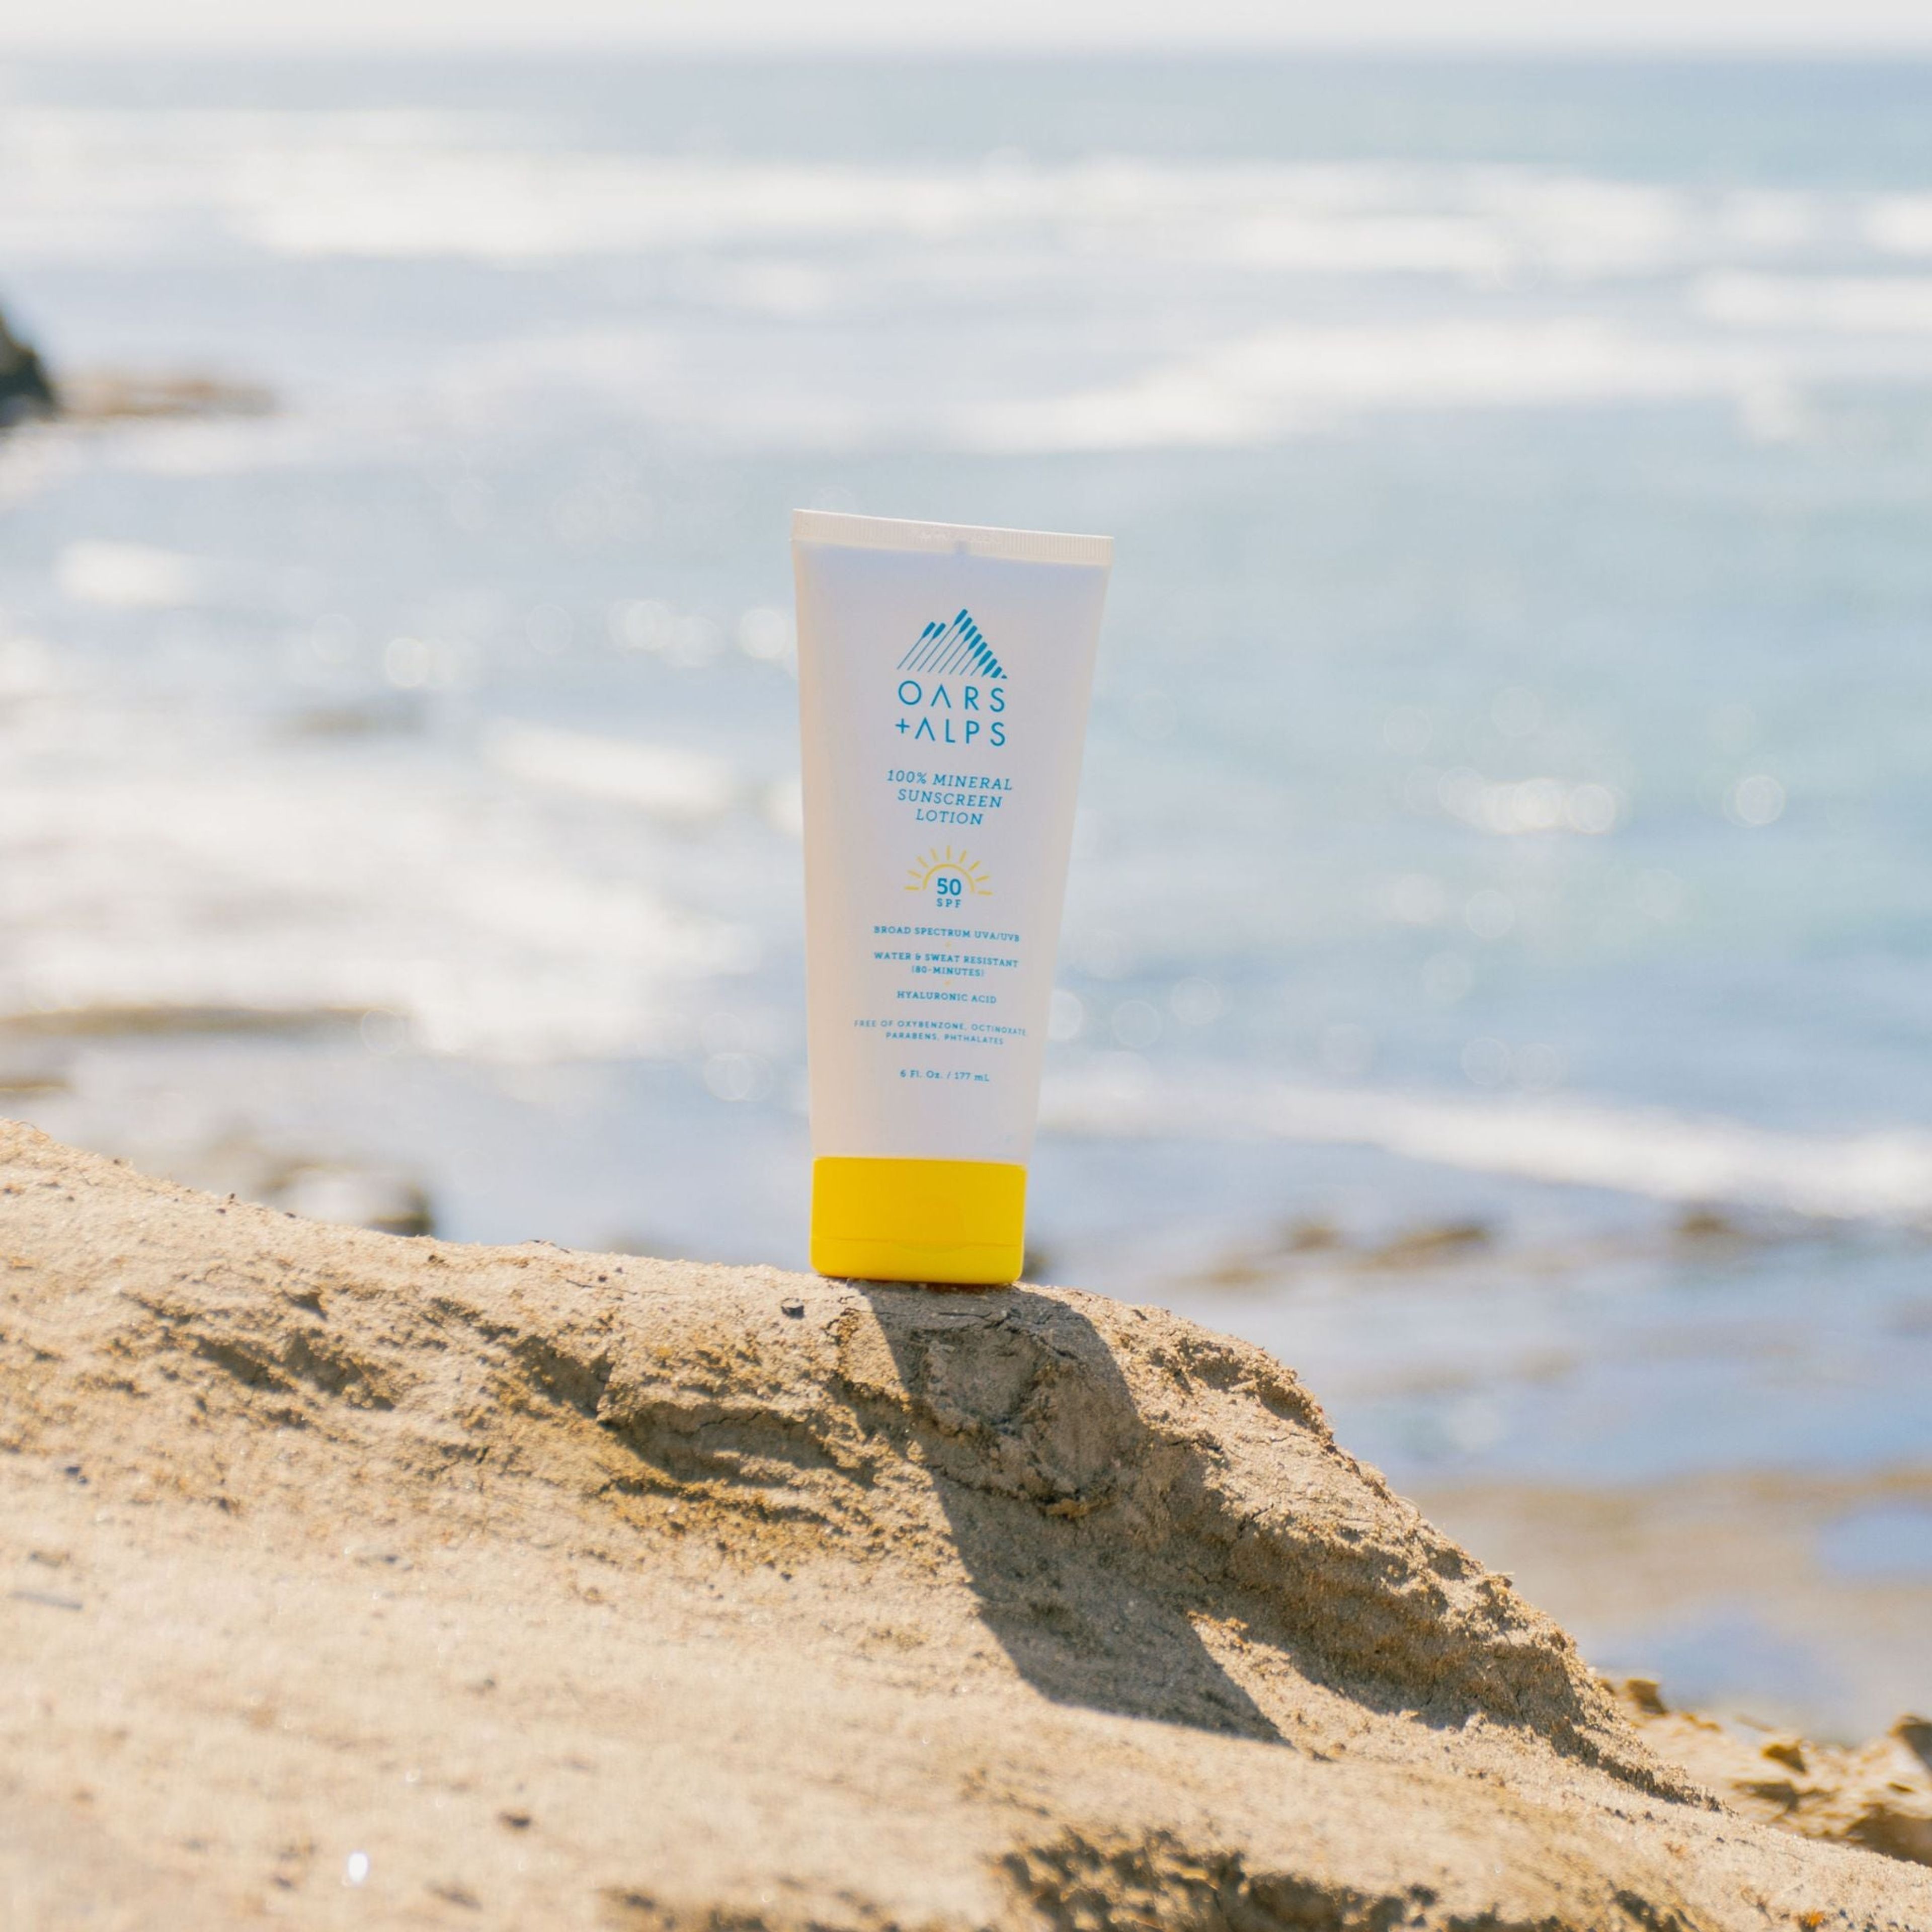 100% Mineral Sunscreen Lotion with SPF 50